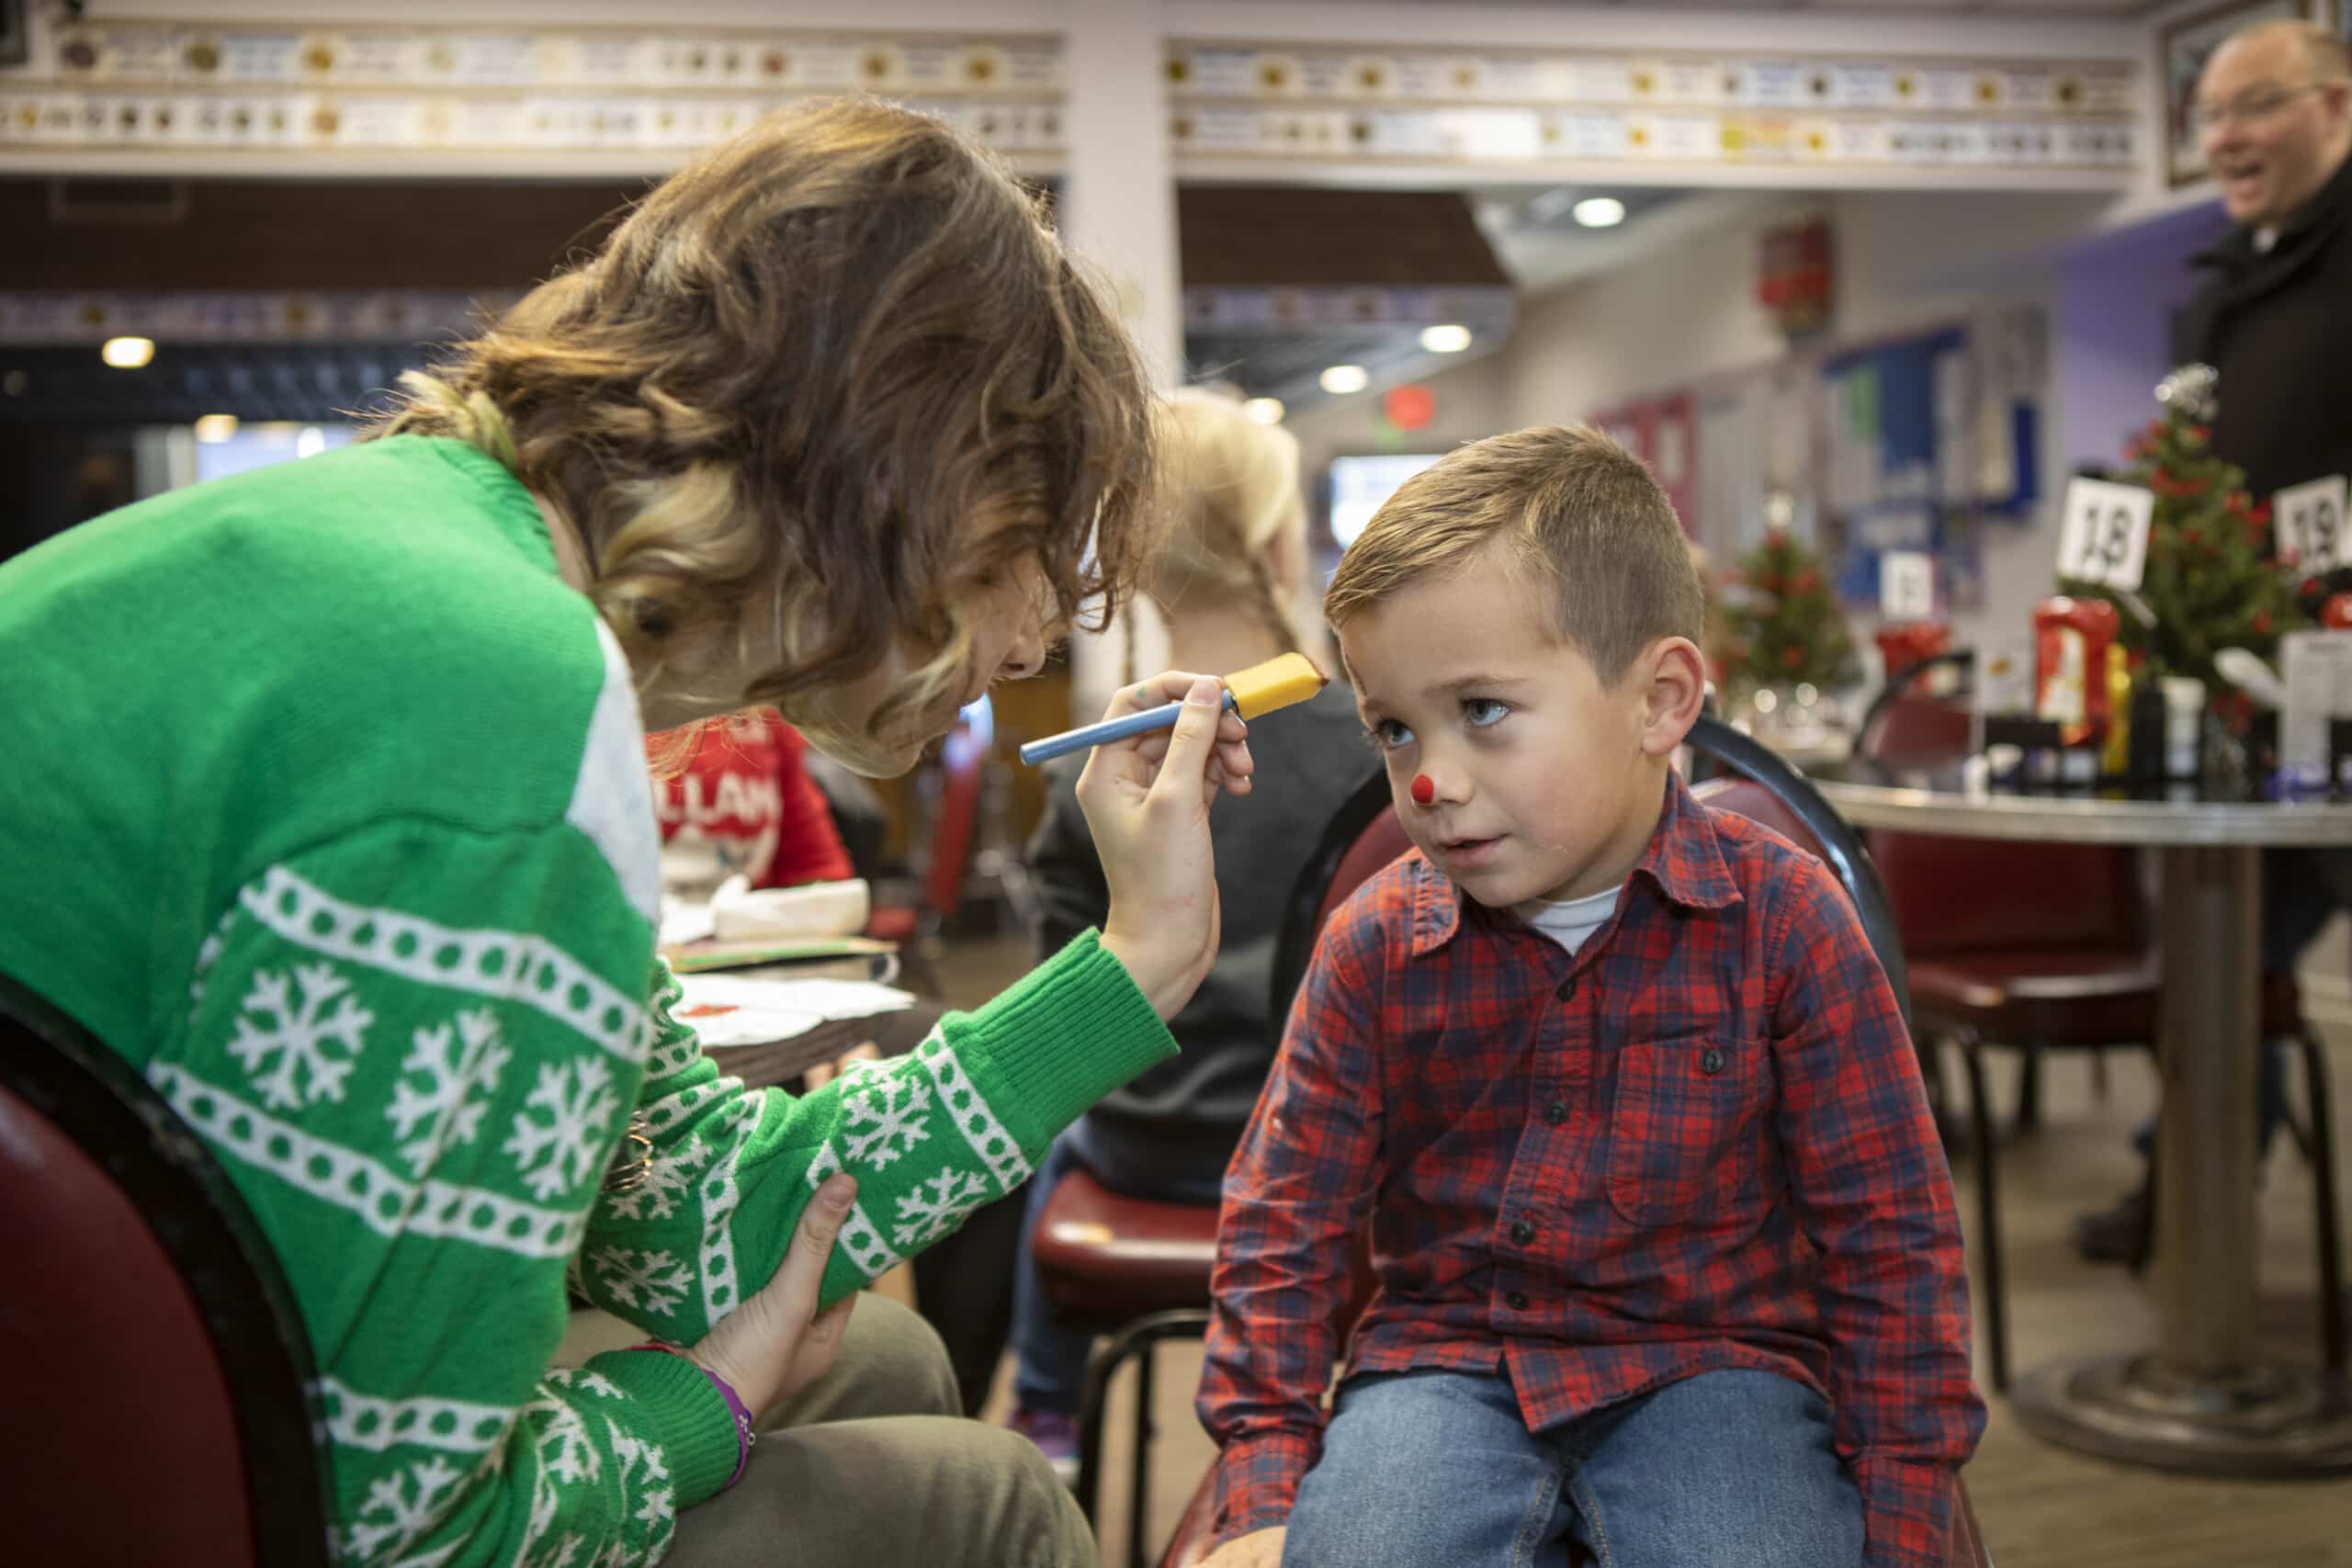 Child getting face painted at holiday event.